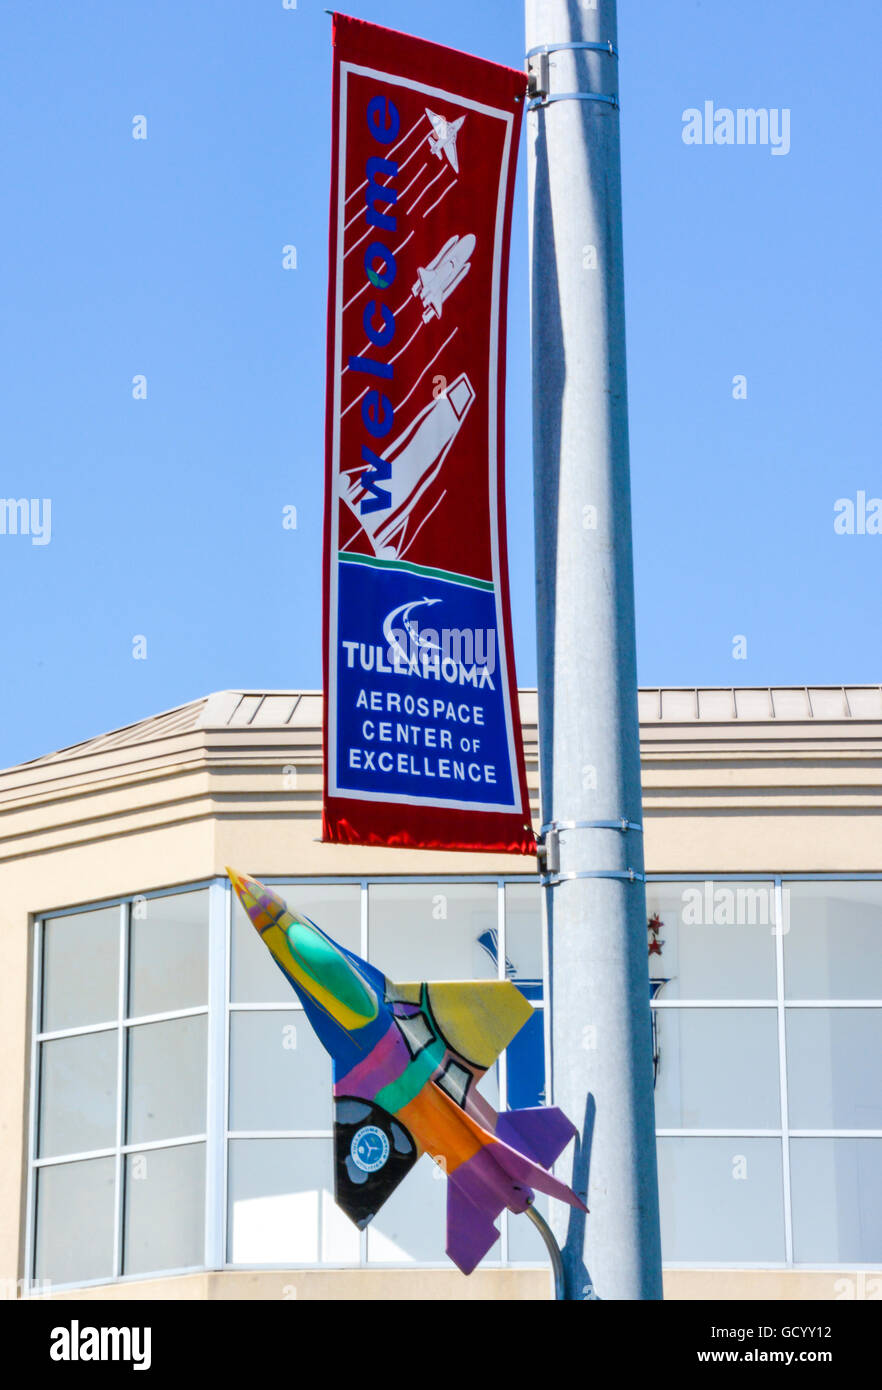 The City of Tullahoma's Aerospace Center of Excellence welcomes visitors with colorful sign & airplane on a street post in TN Stock Photo